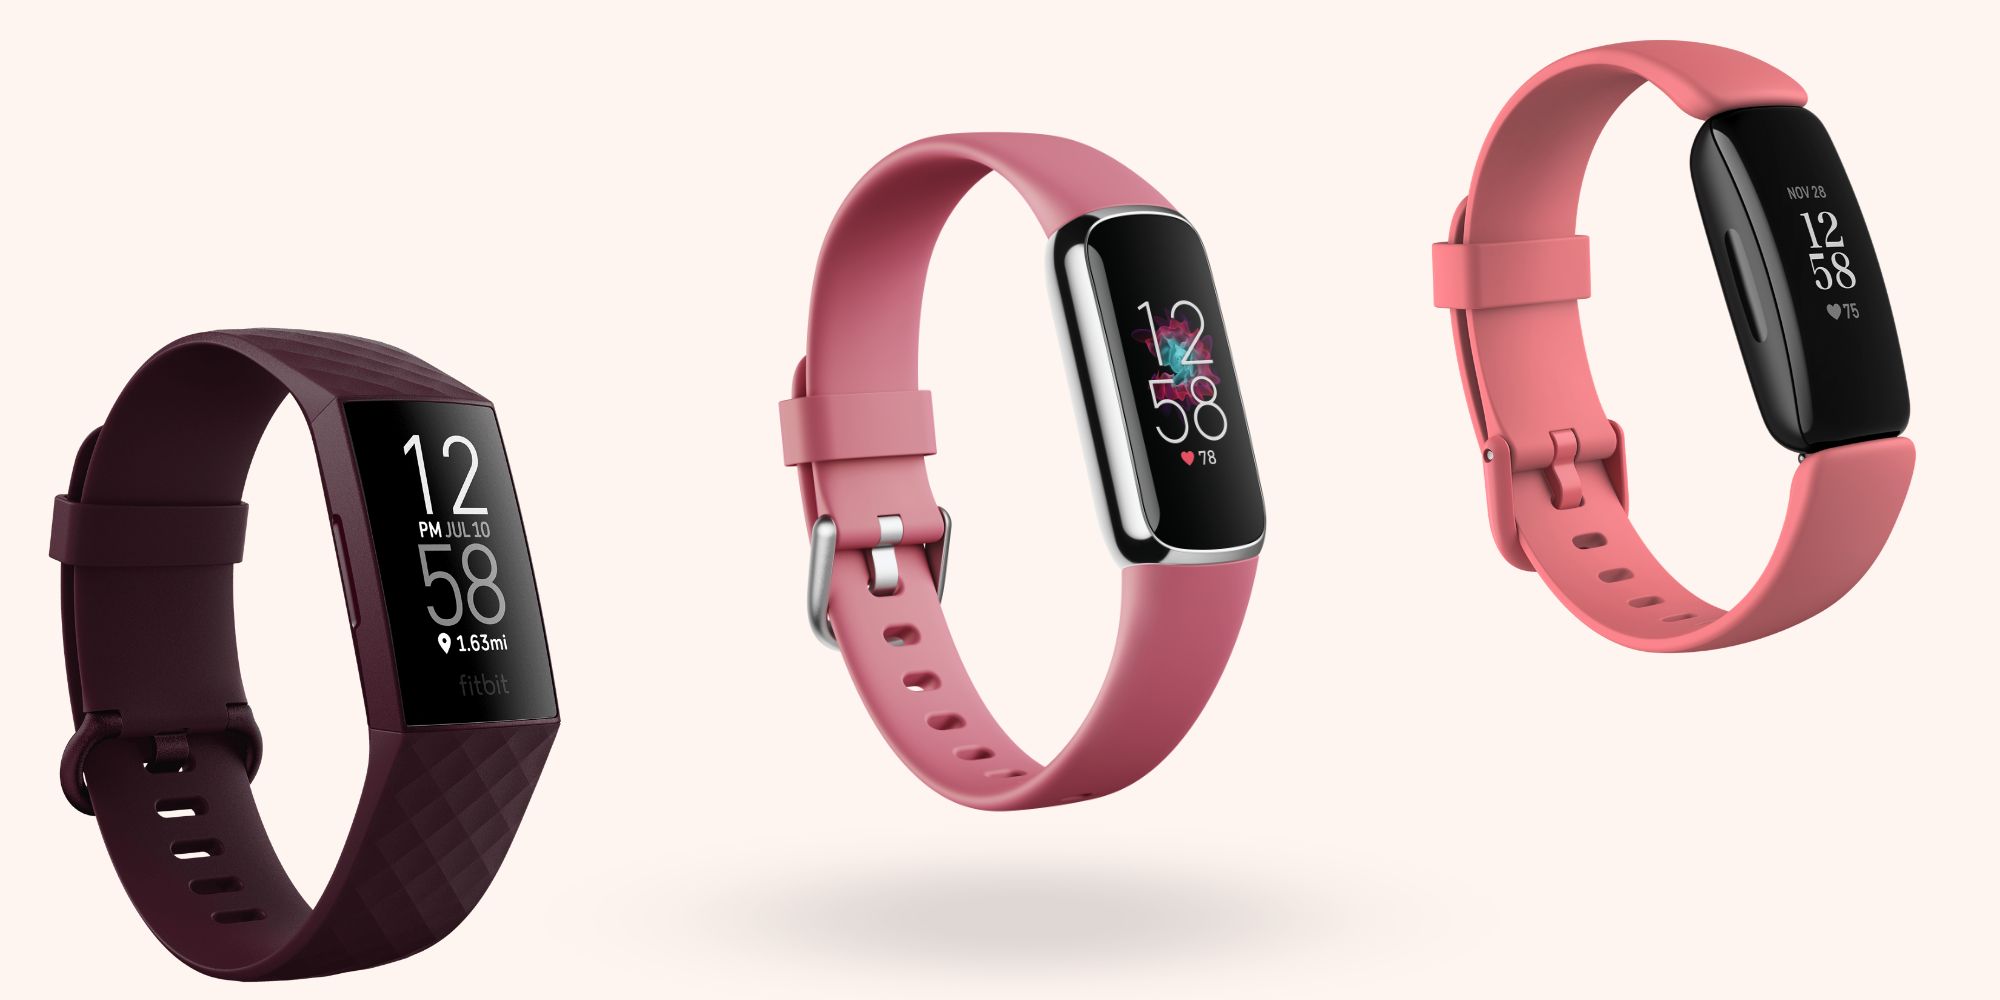 Fitbit Luxe next to Charge 4 and Inspire 2 trackers